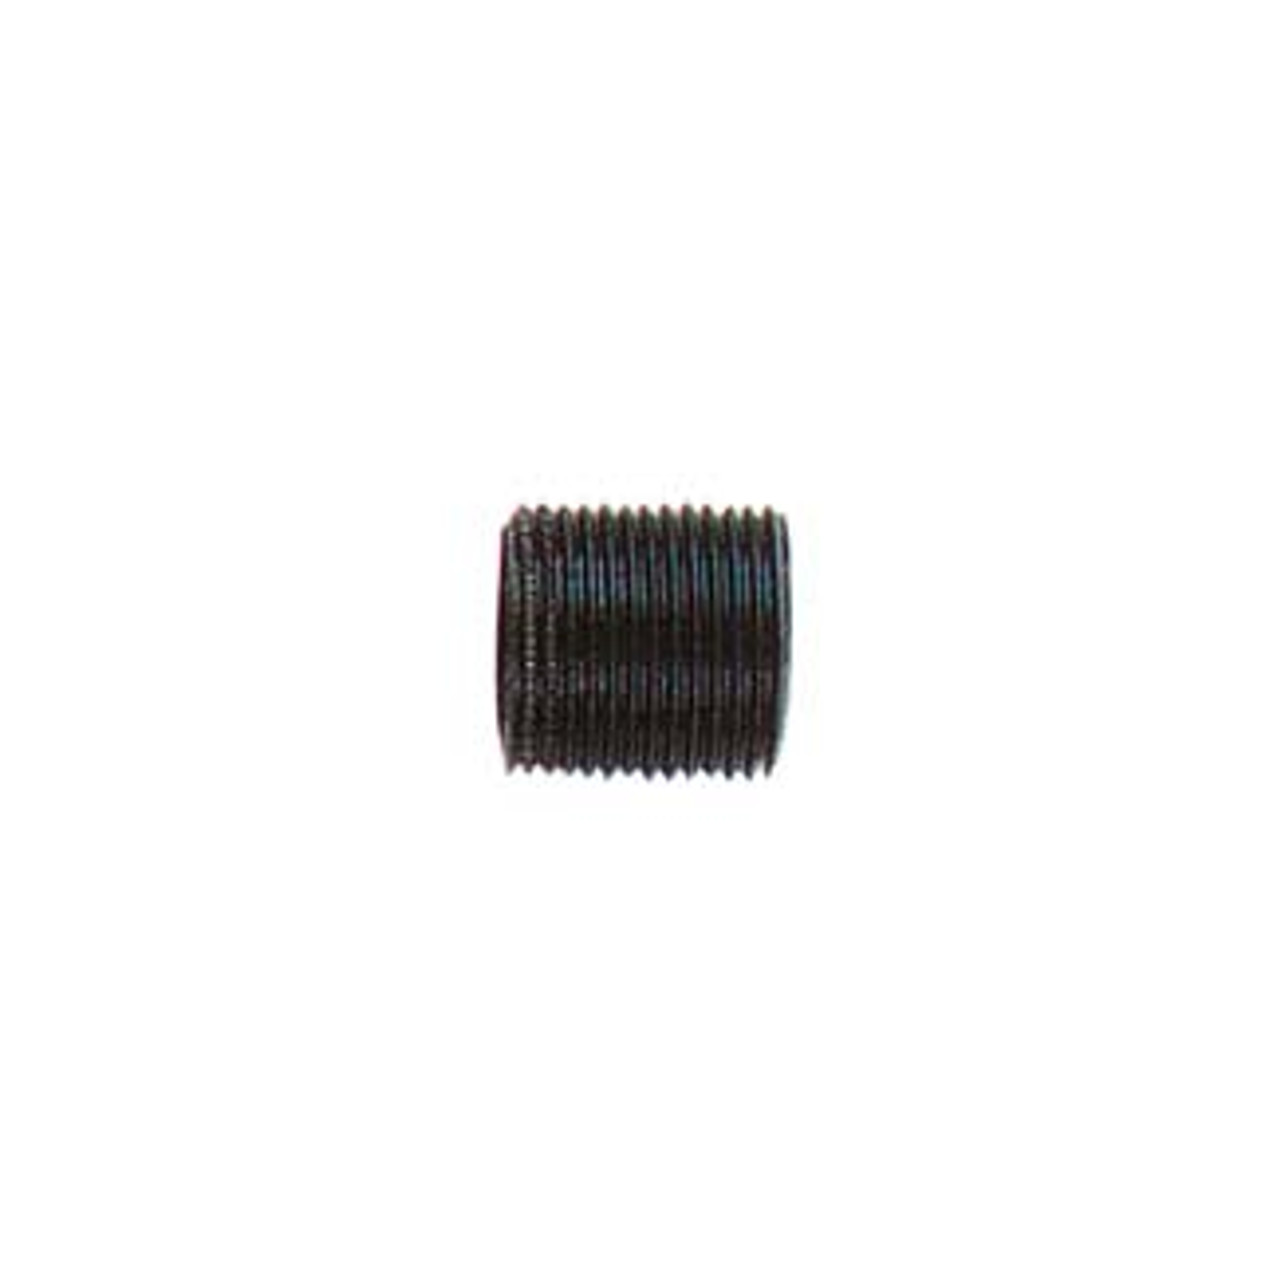 Spark Plug Solid Type Insert - Long Reach (2214-L)